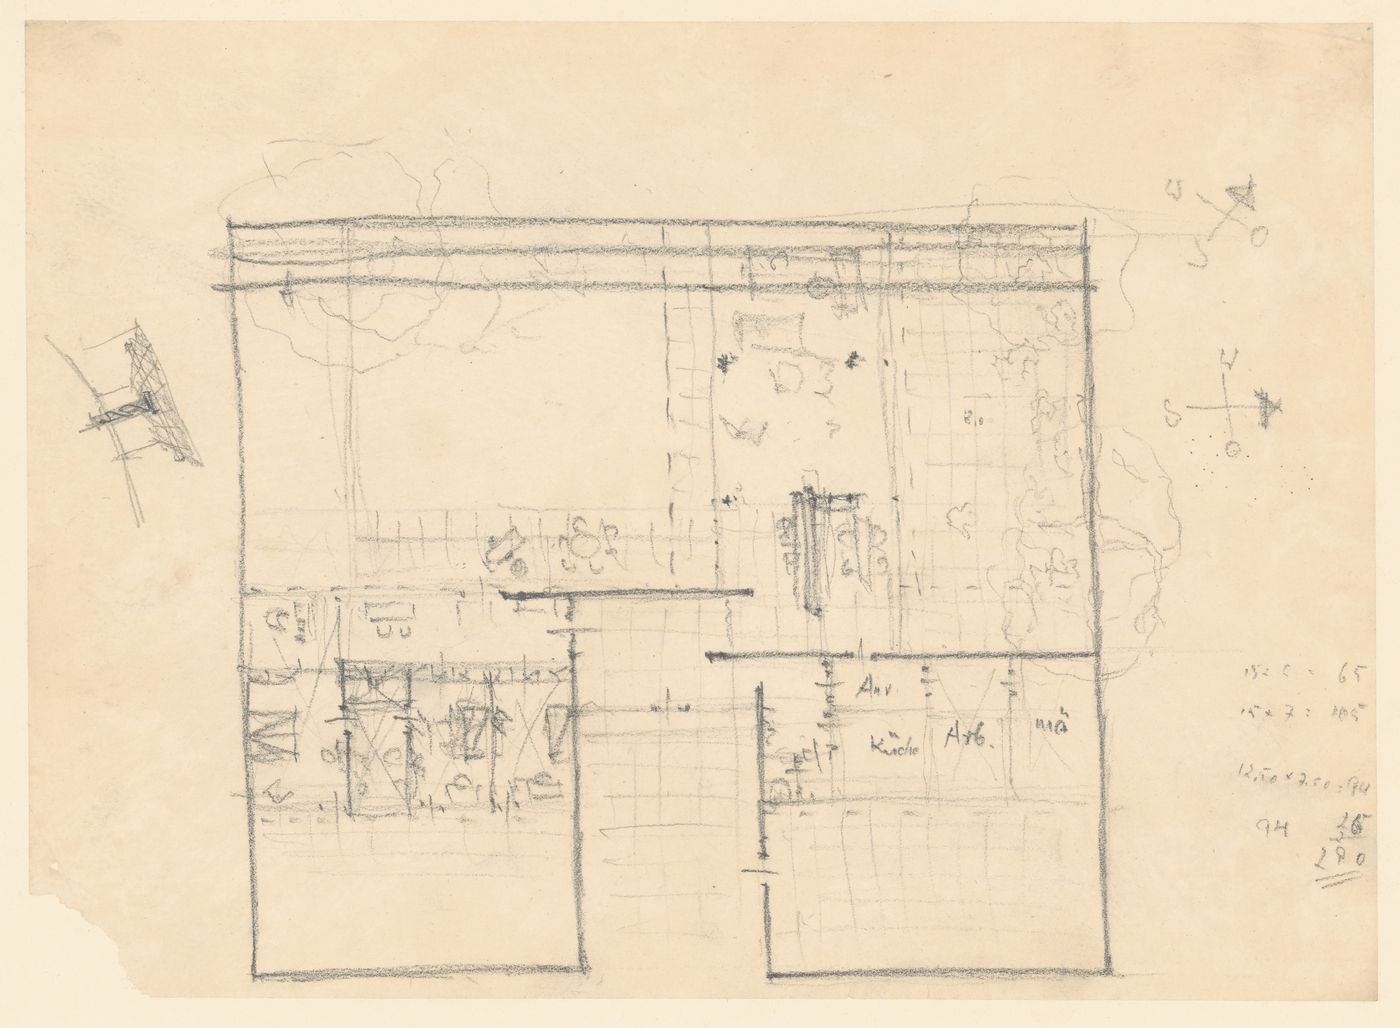 Plan for a Court House with perspective sketch for the interior